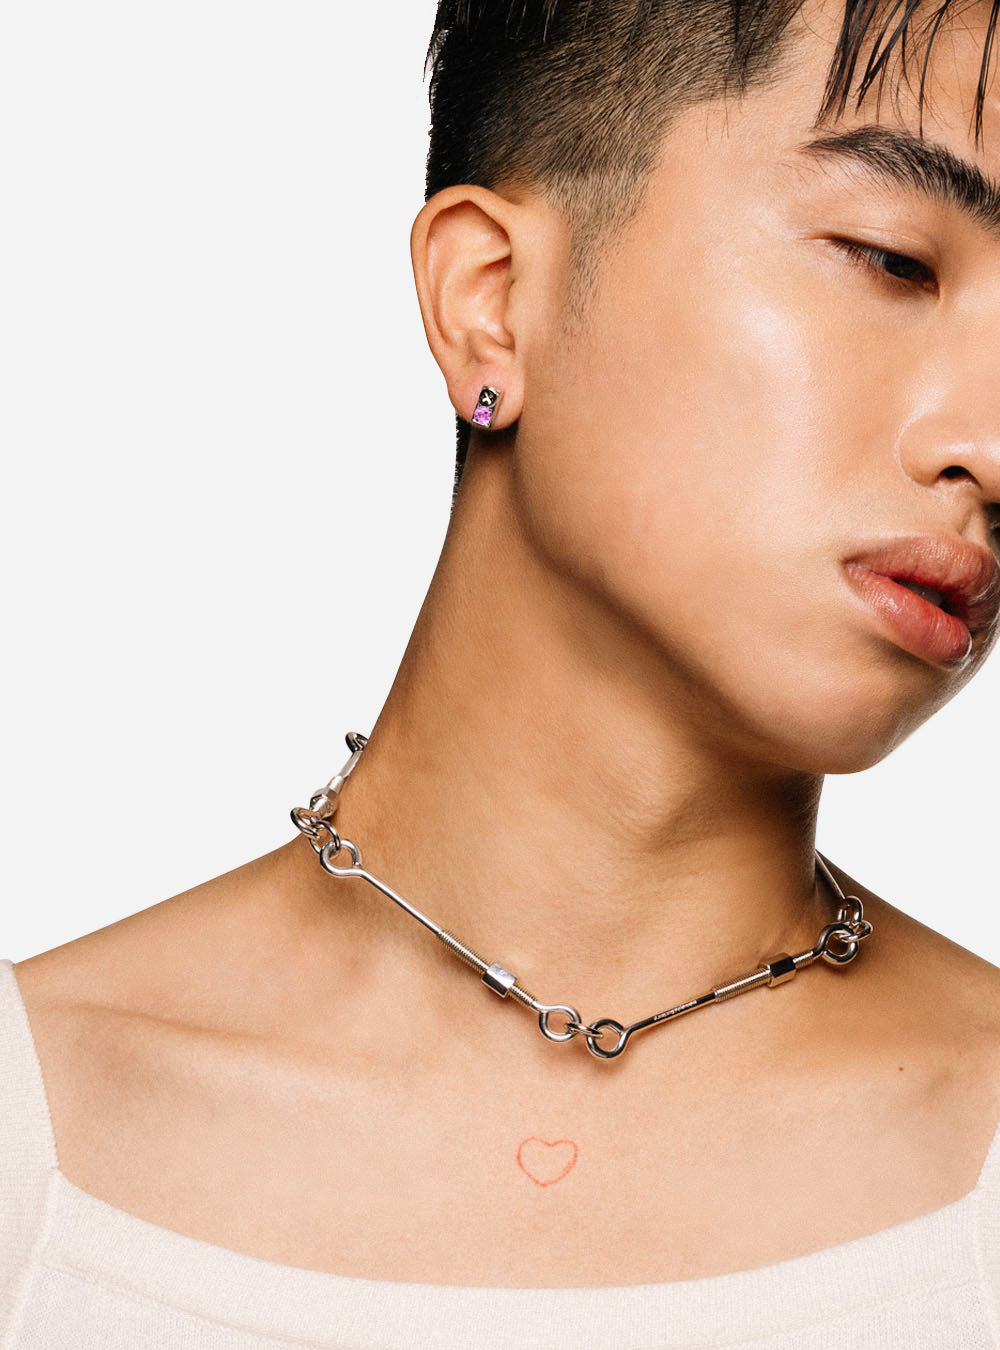 a man wearing a MIDNIGHTFACTORY Screwbox earrings necklace with a heart on it.